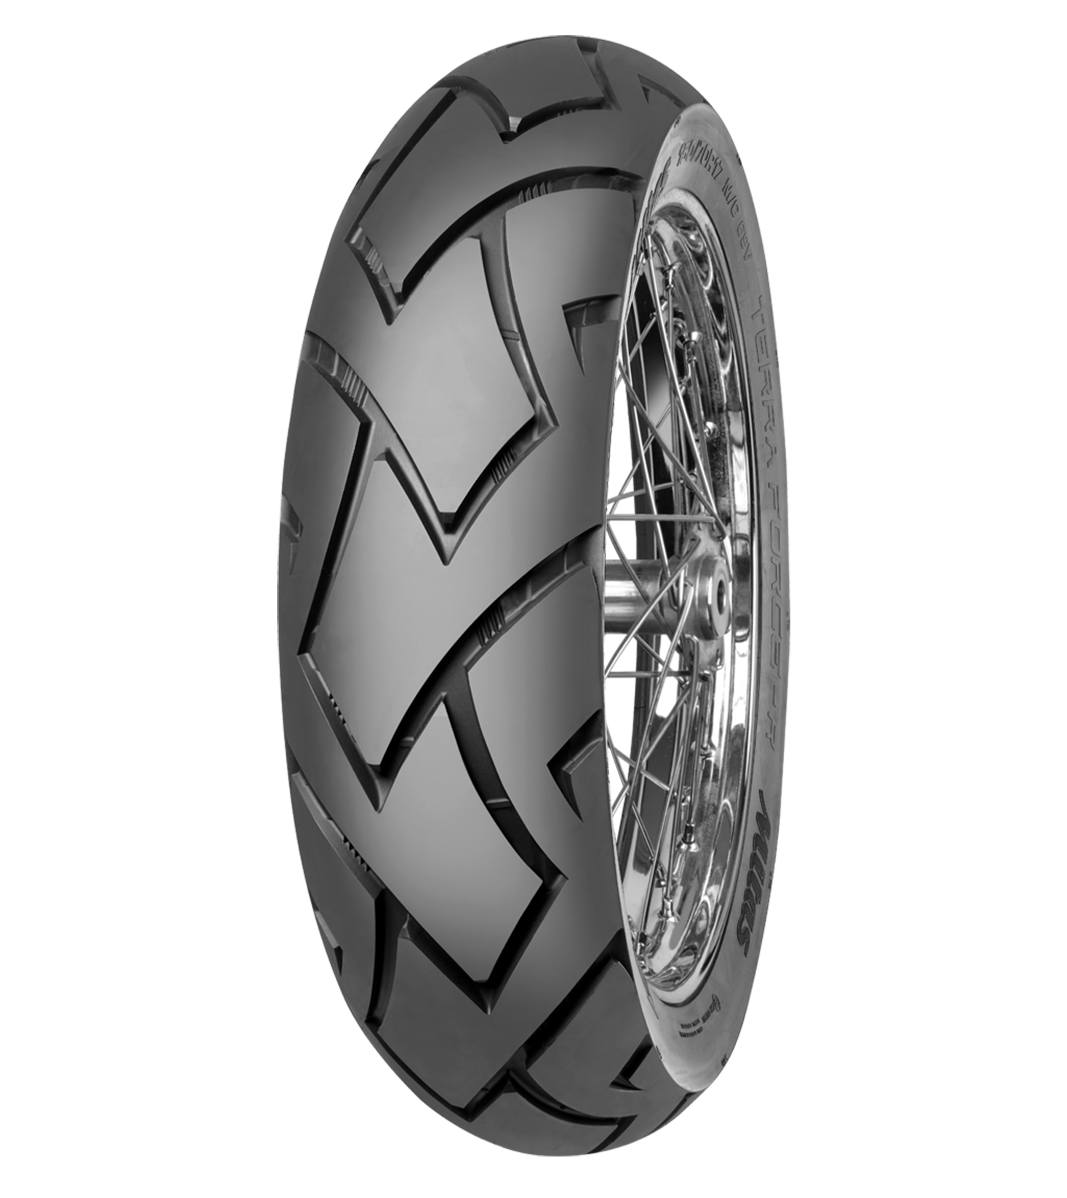 Mitas TERRA FORCE-R 150/70R18 Trail ON Trail 70V No Stripe Tubeless Rear Tire, 605796, 150/70R18, Adventure Touring, Rear, Terra Force, Terra Force-R, Trail, Trail ON, Tires - Imported and distributed in North &amp; South America by Lindeco Genuine Powersports - Premier Powersports Equipment and Accessories for Motorcycle Enthusiasts, Professional Riders and Dealers.